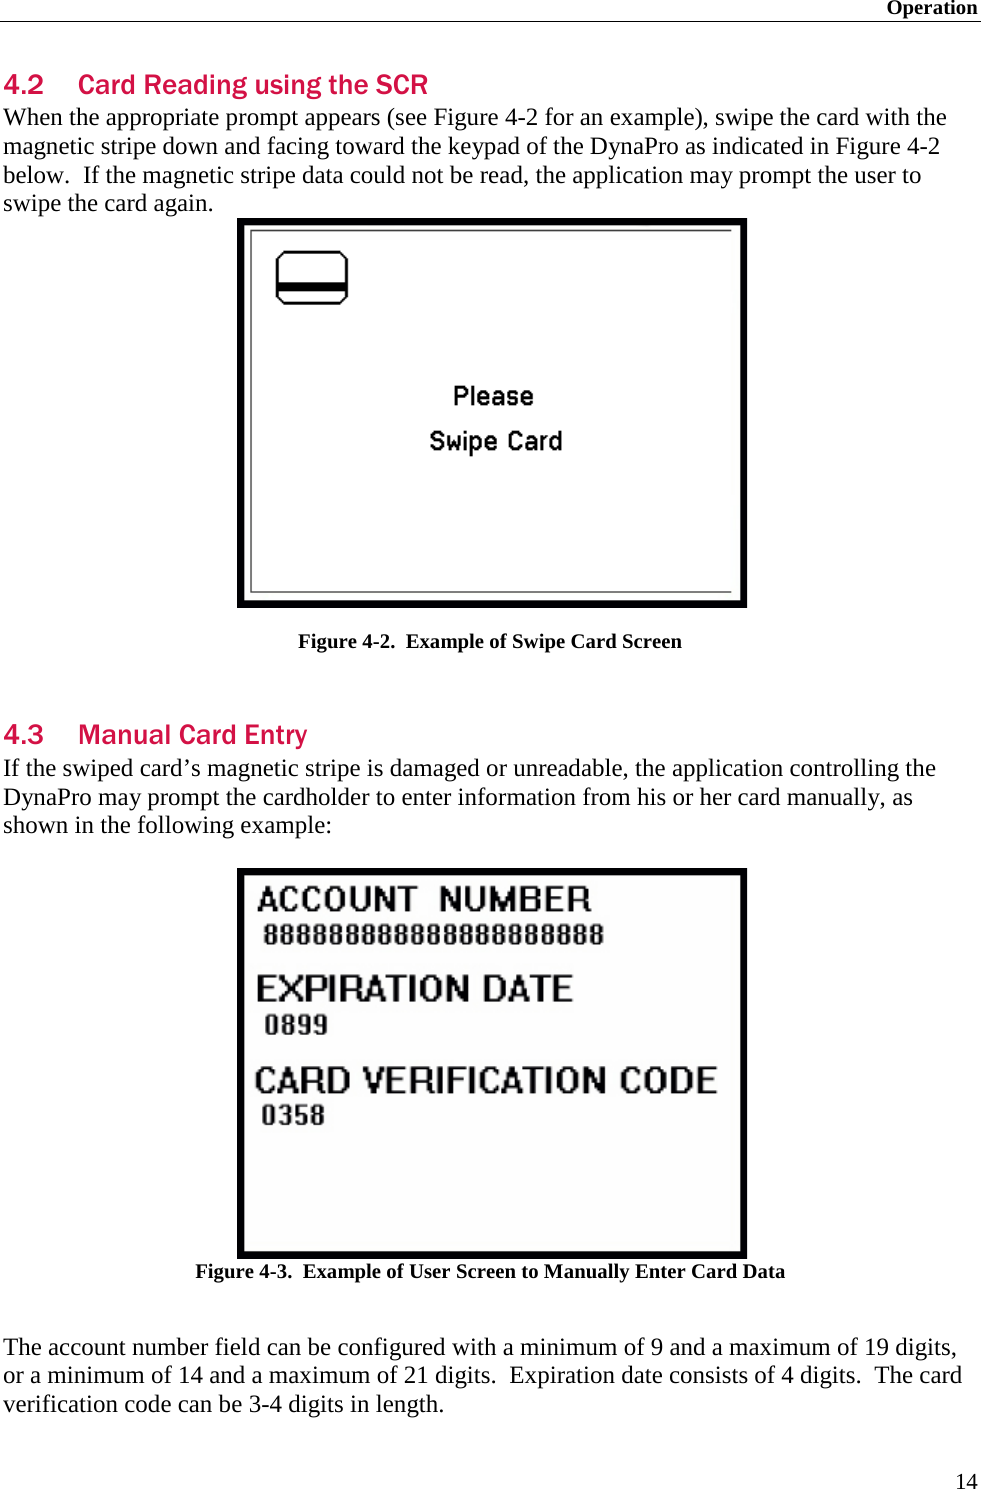 Operation 14 4.2 Card Reading using the SCR When the appropriate prompt appears (see Figure 4-2 for an example), swipe the card with the magnetic stripe down and facing toward the keypad of the DynaPro as indicated in Figure 4-2 below.  If the magnetic stripe data could not be read, the application may prompt the user to swipe the card again.  Figure 4-2.  Example of Swipe Card Screen  4.3 Manual Card Entry If the swiped card’s magnetic stripe is damaged or unreadable, the application controlling the DynaPro may prompt the cardholder to enter information from his or her card manually, as shown in the following example:   Figure 4-3.  Example of User Screen to Manually Enter Card Data  The account number field can be configured with a minimum of 9 and a maximum of 19 digits, or a minimum of 14 and a maximum of 21 digits.  Expiration date consists of 4 digits.  The card verification code can be 3-4 digits in length. 